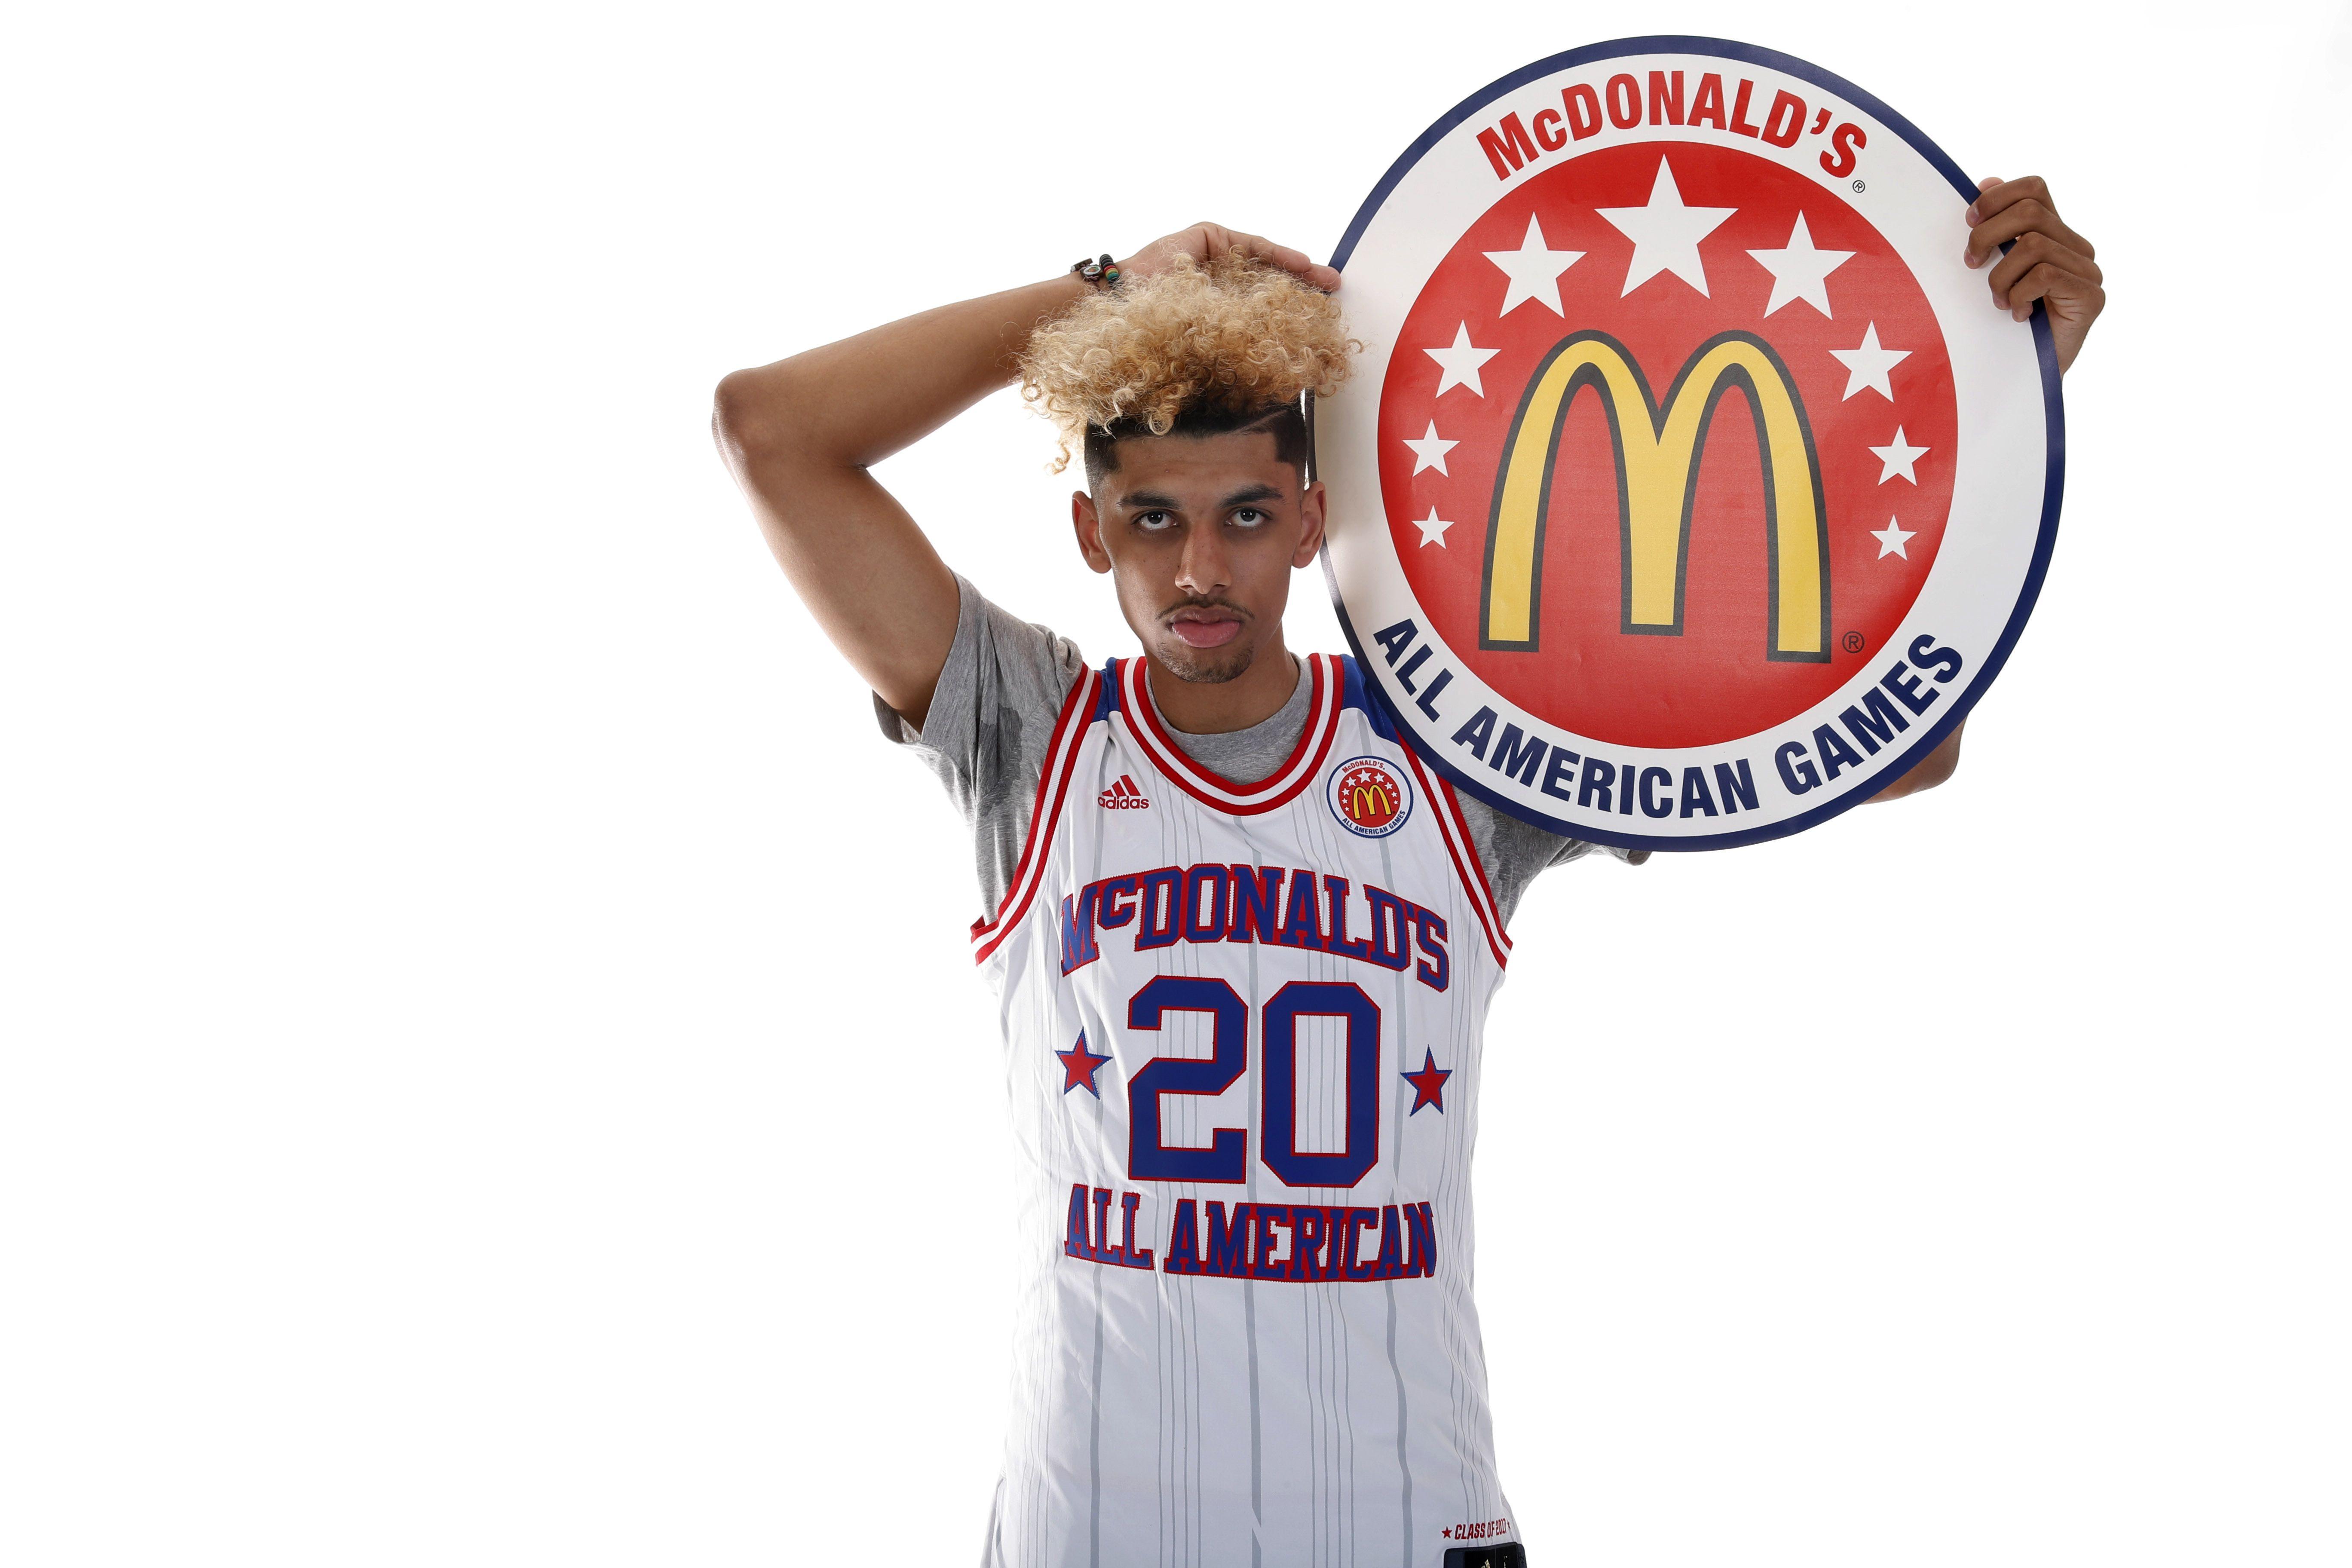 McDonald's All American Basketball Logo - McDonald's All American Game: Meet the uncommitteds